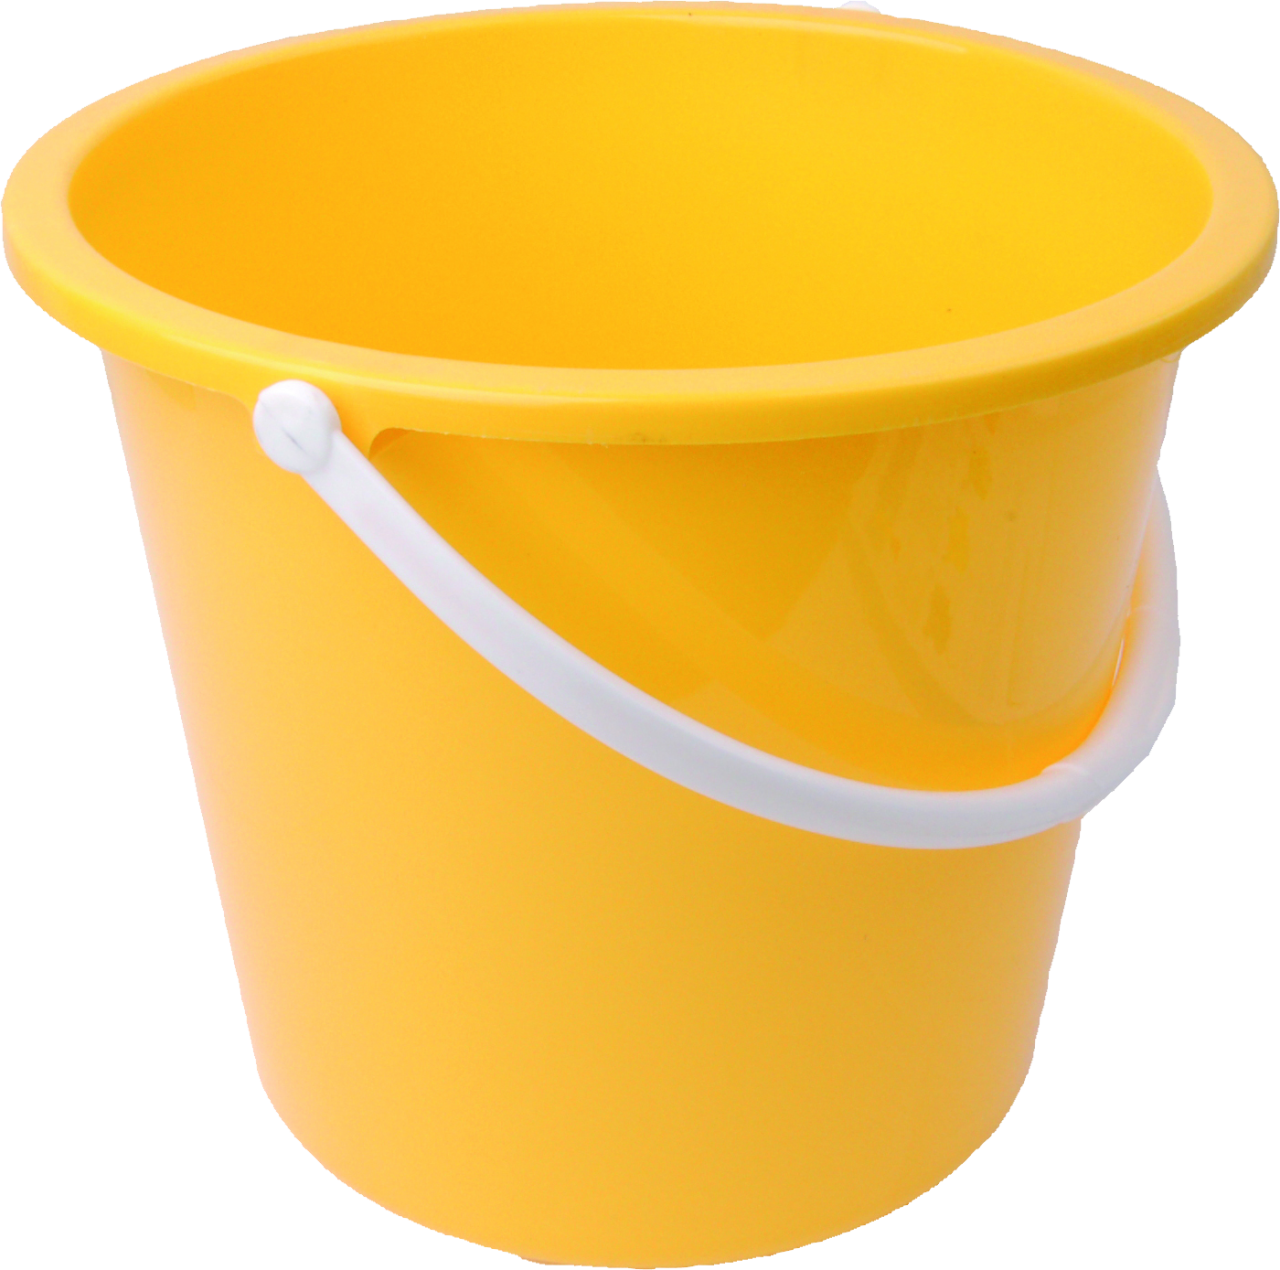 Download Yellow PLastic Bucket PNG Image - PurePNG | Free transparent CC0 PNG Image Library